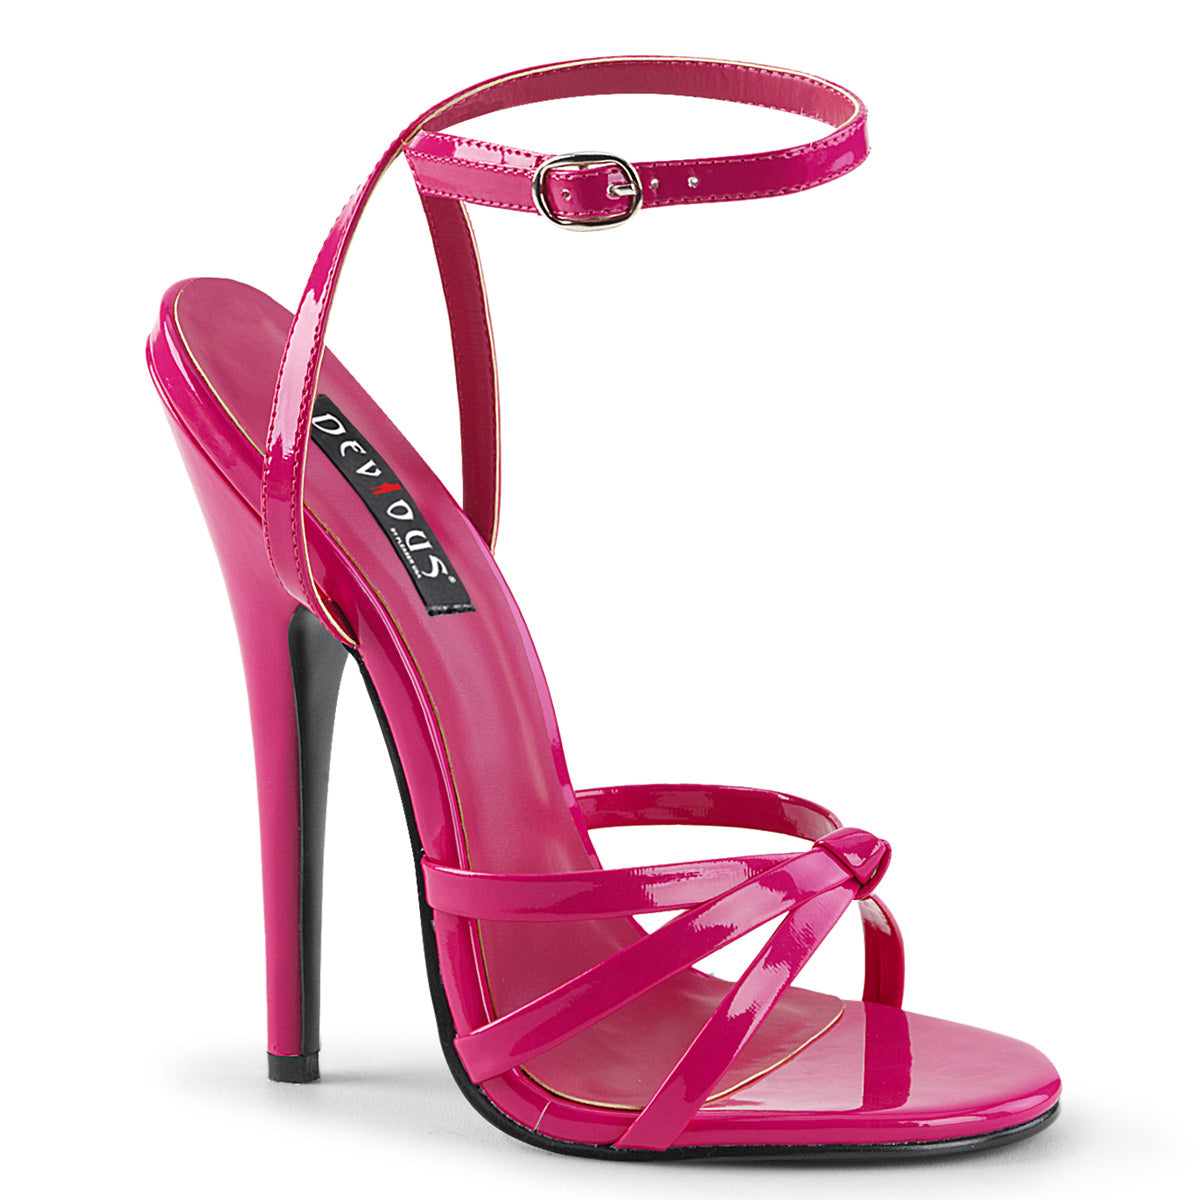 DOMINA-108 Hot Pink Patent Ankle High Heel  Multi view 1